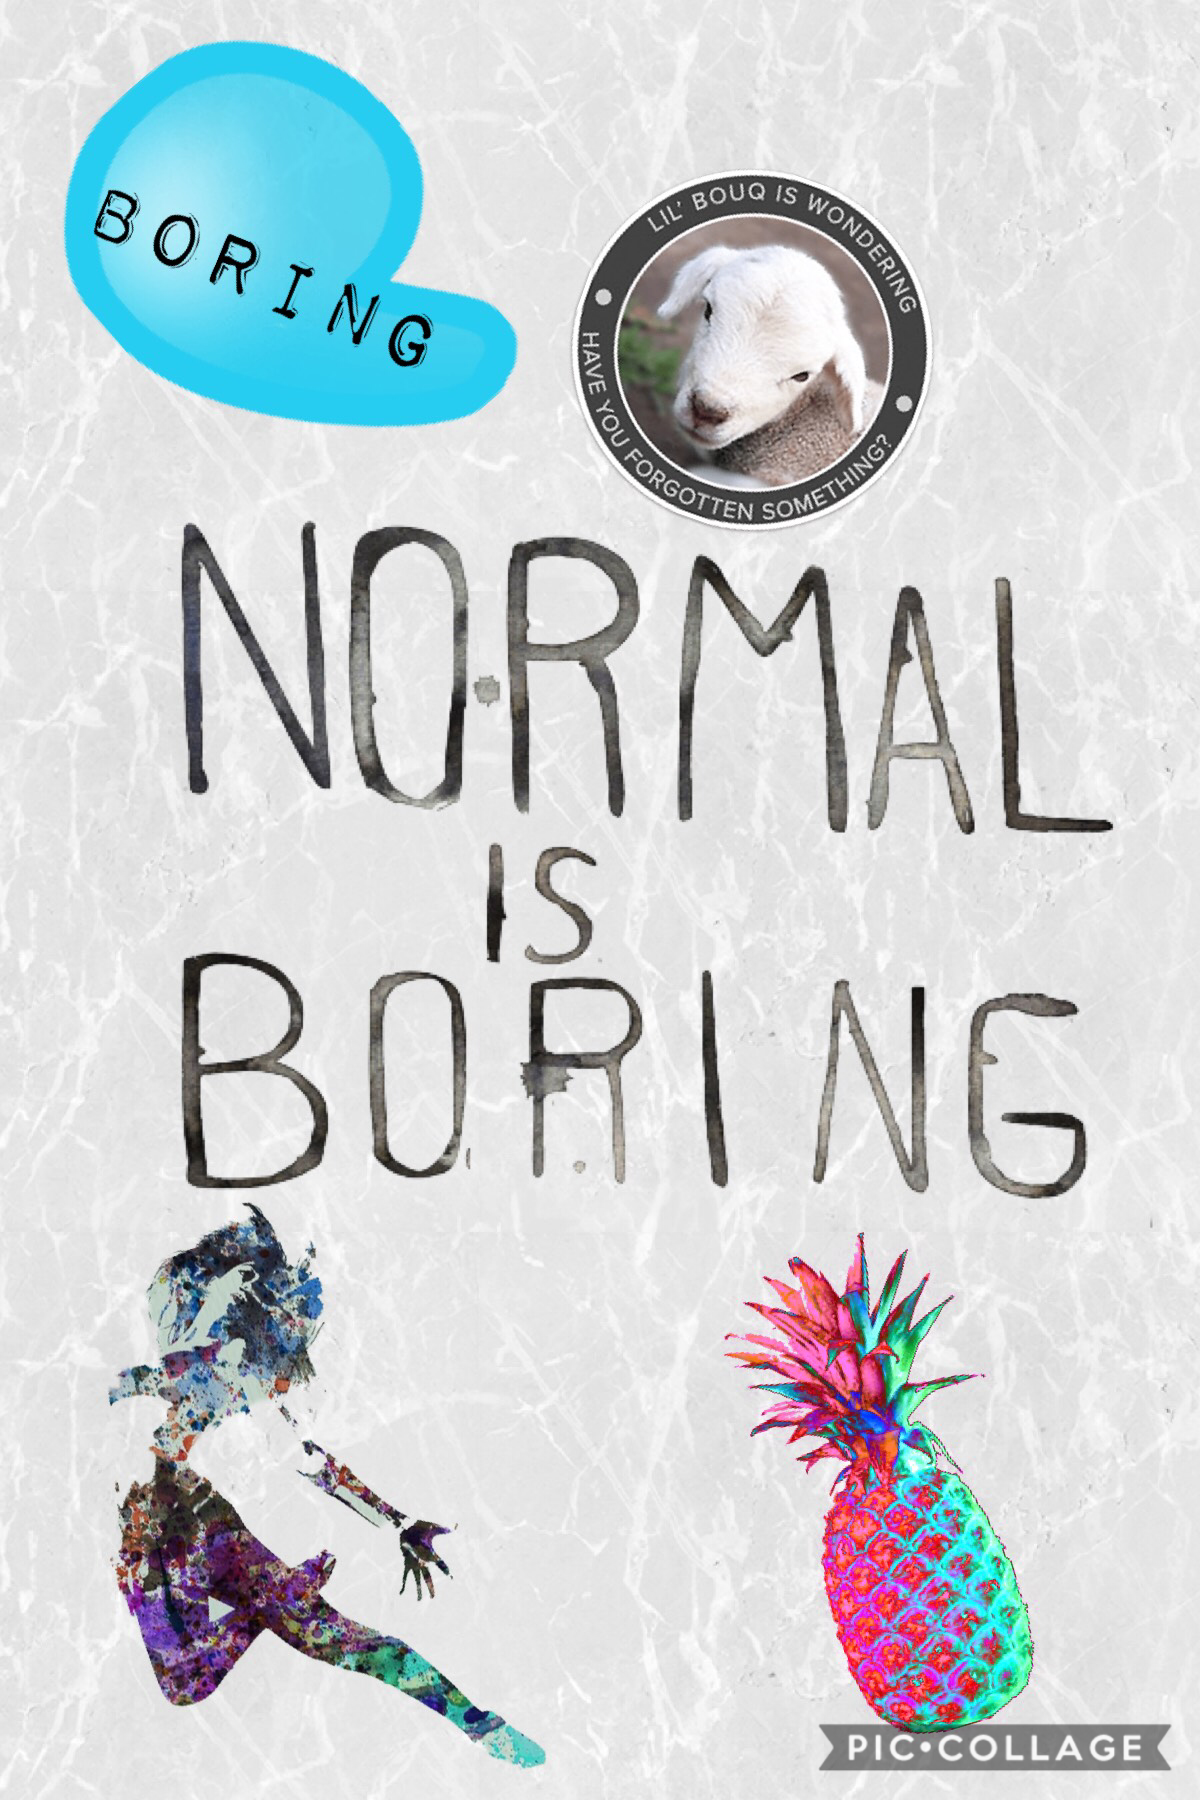 Boring!! Don’t be just well............ NORMAL! Hey be cool😎😎😎😎🤩🤩🤩🤩